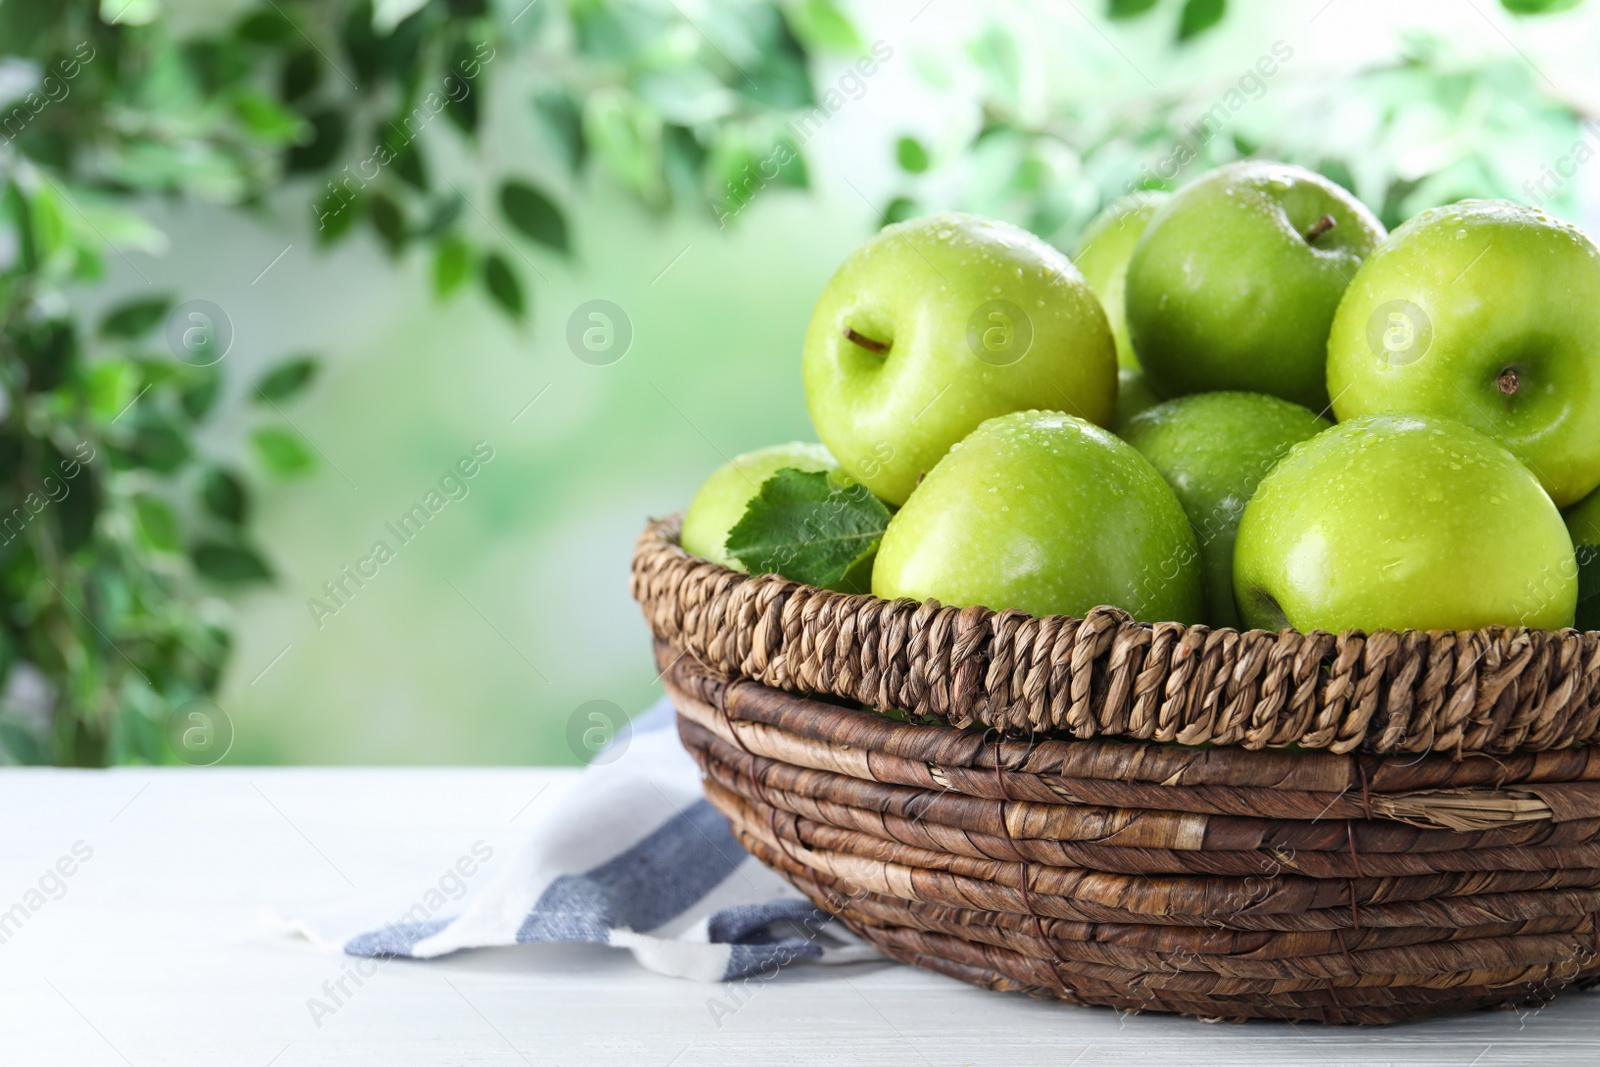 Photo of Juicy green apples in wicker basket on white wooden table outdoors